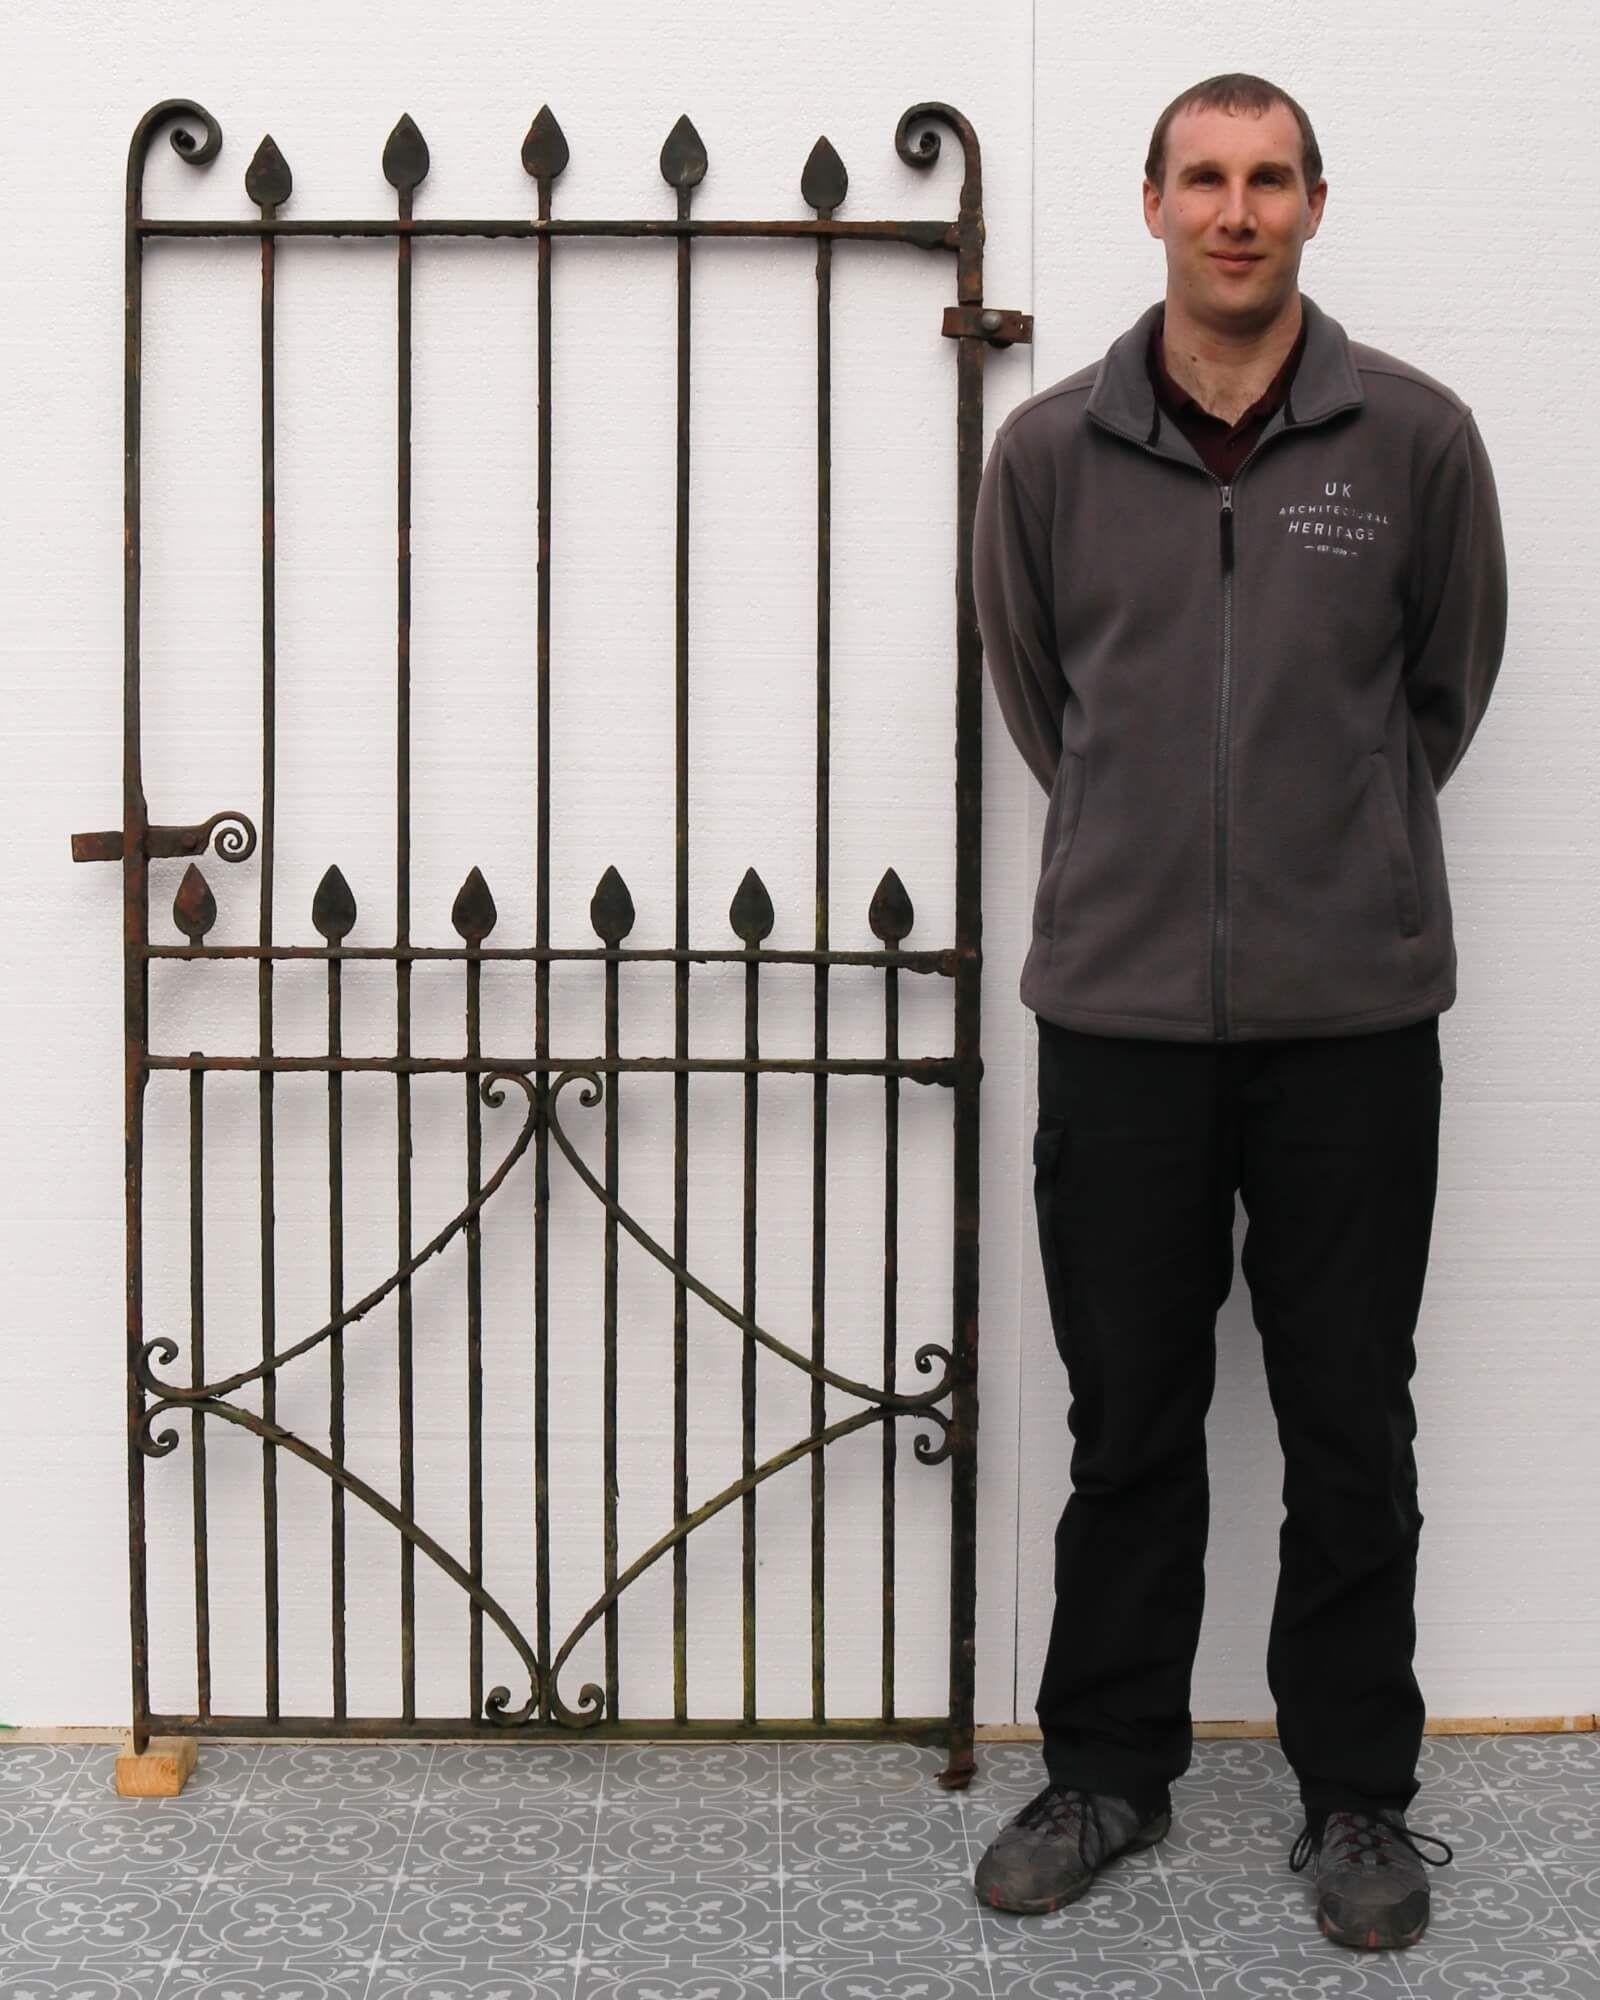 A handsome Victorian wrought iron side gate, perfectly proportioned for placement along the side of a house or for security in a narrow passageway. This tall antique gate has a simple yet stunning design, detailed with scrolls and curved arrowhead